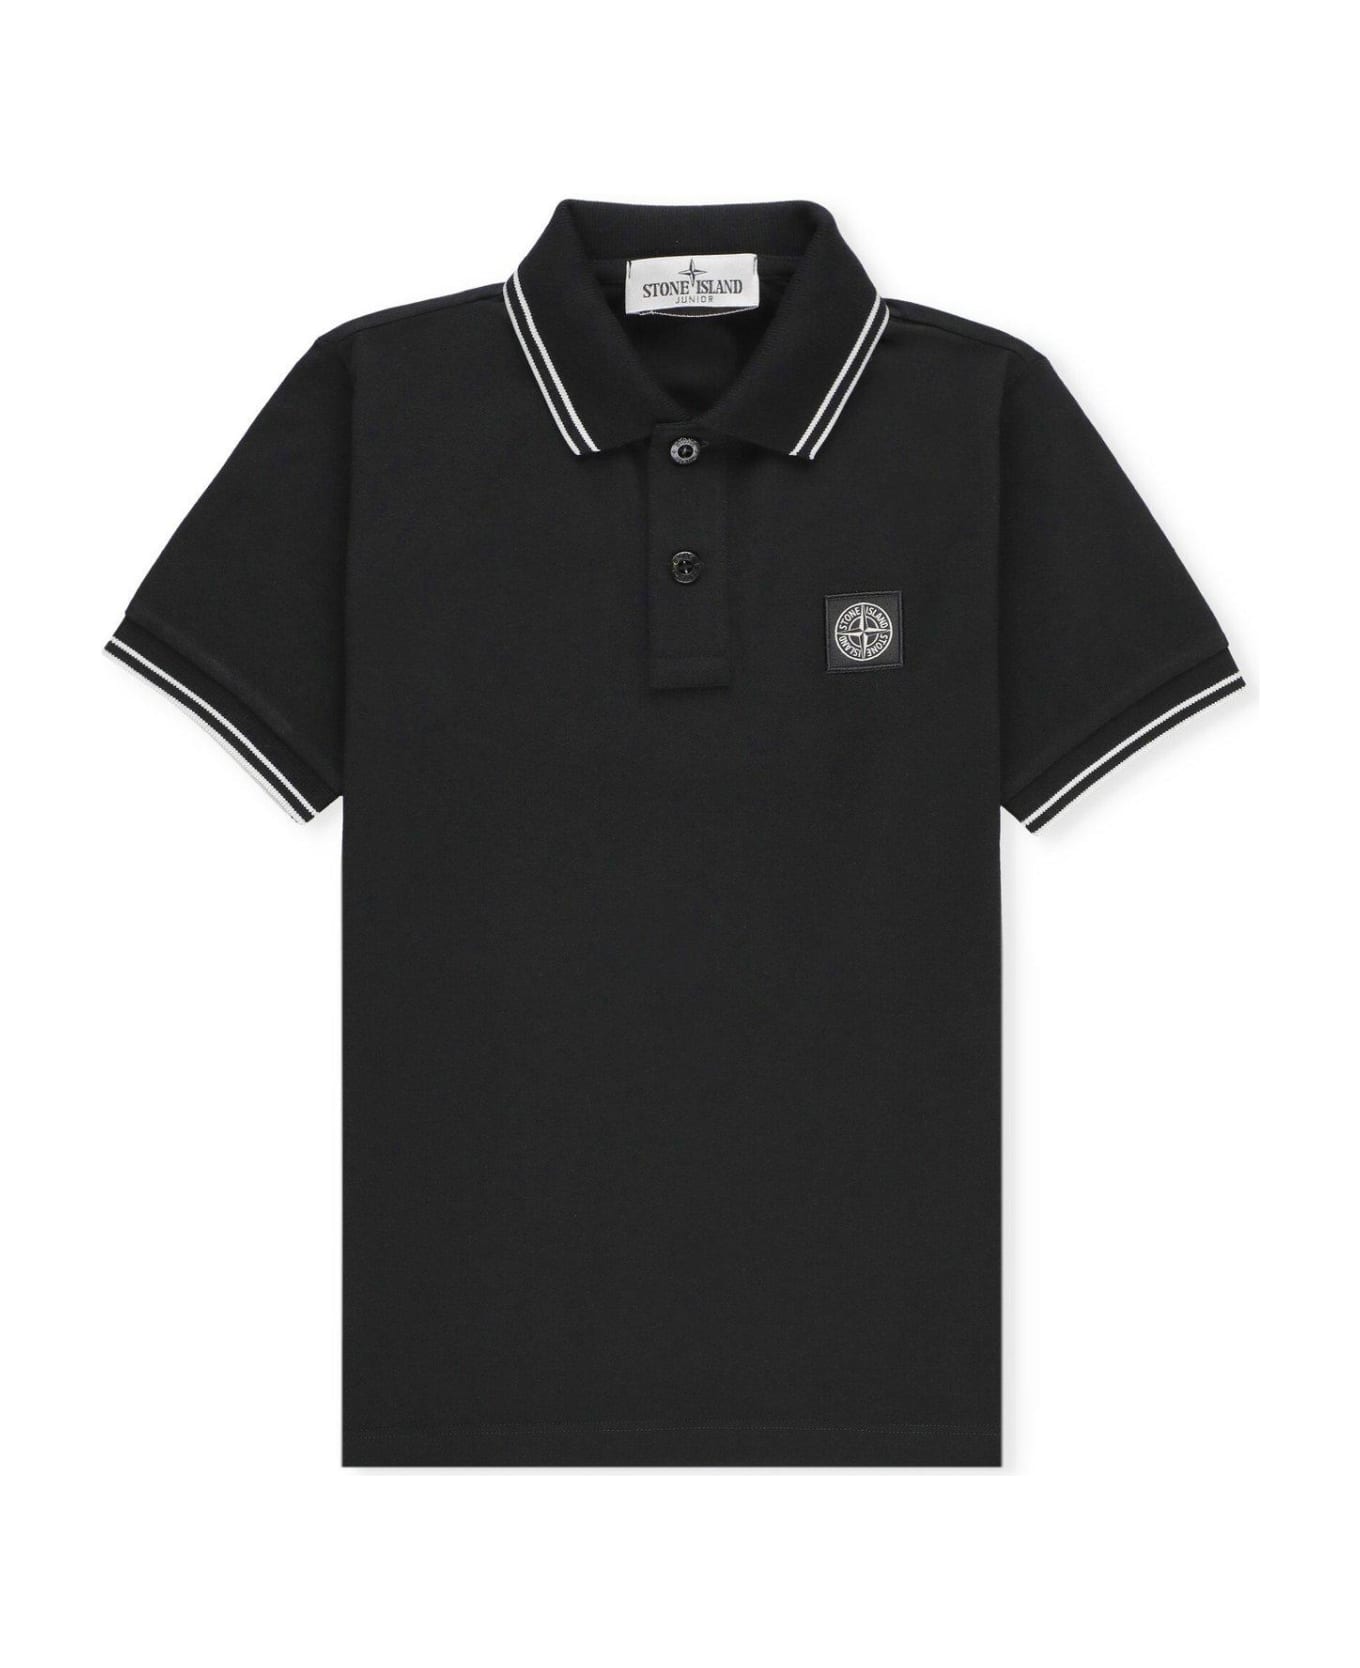 Stone Island Compass Patch Short-sleeved Polo Shirt - BLACK シャツ